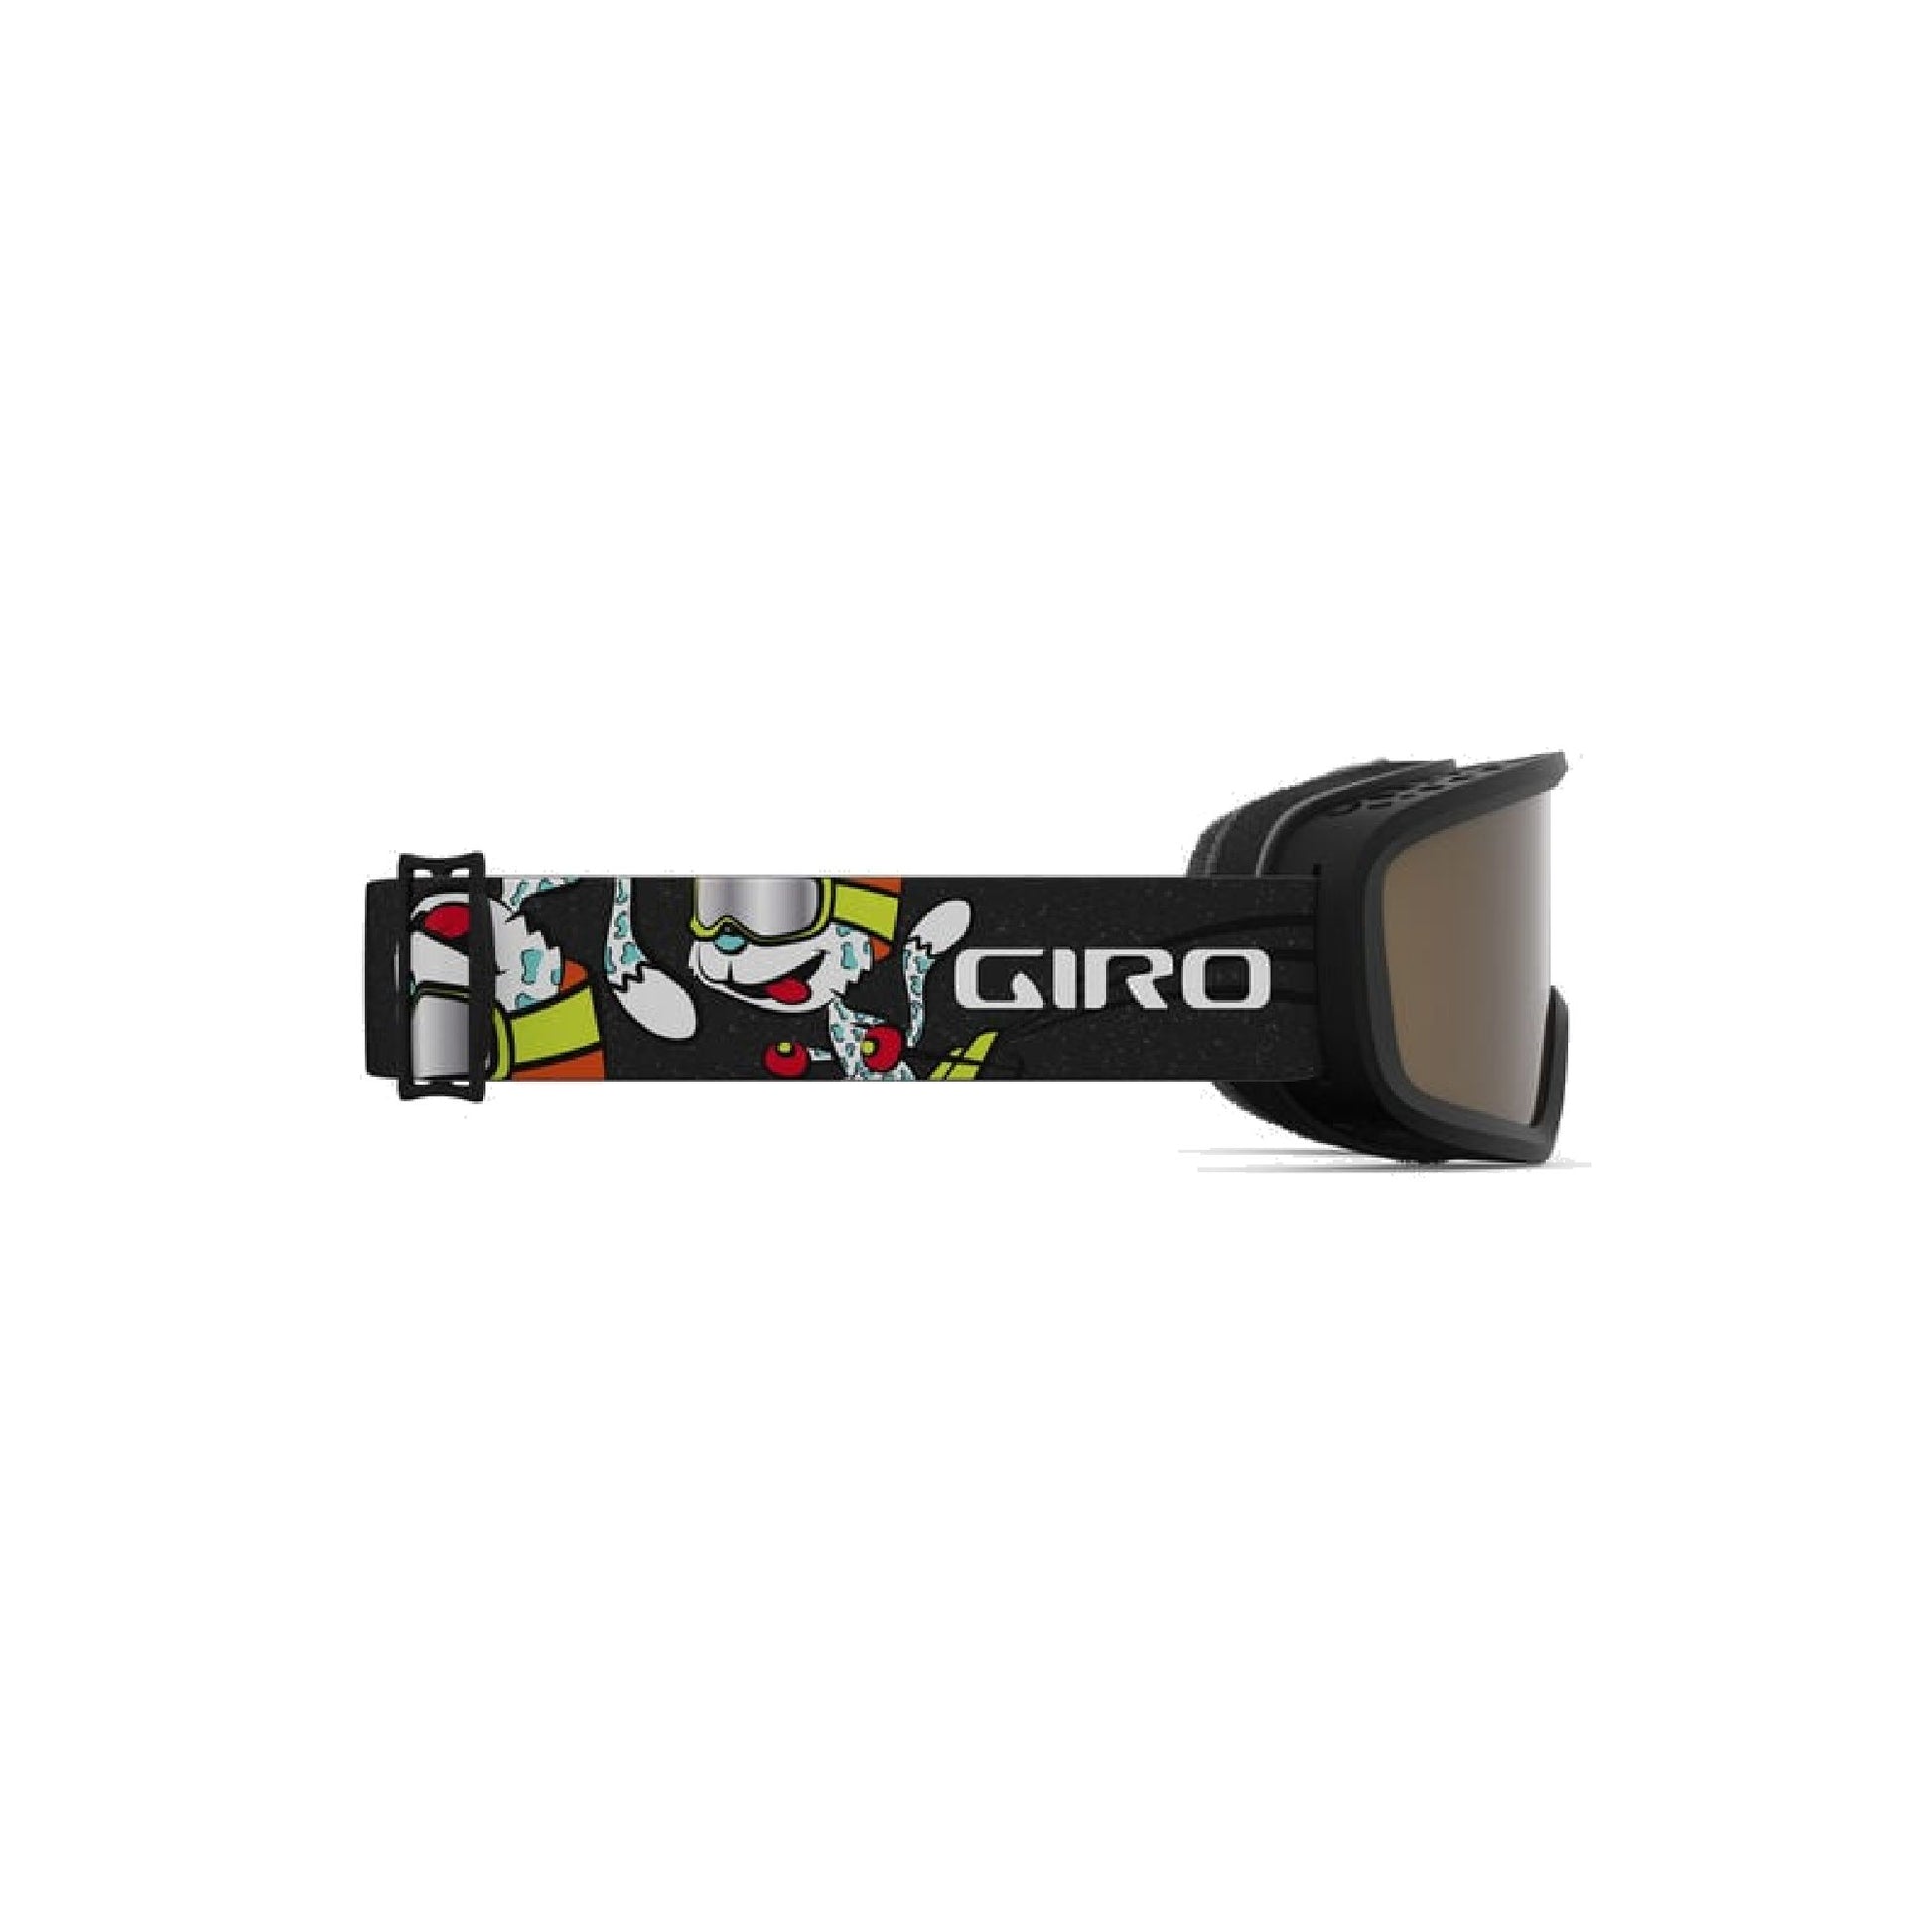 Giro Youth Chico 2.0 Snow Goggles Black Ashes Amber Rose Snow Goggles